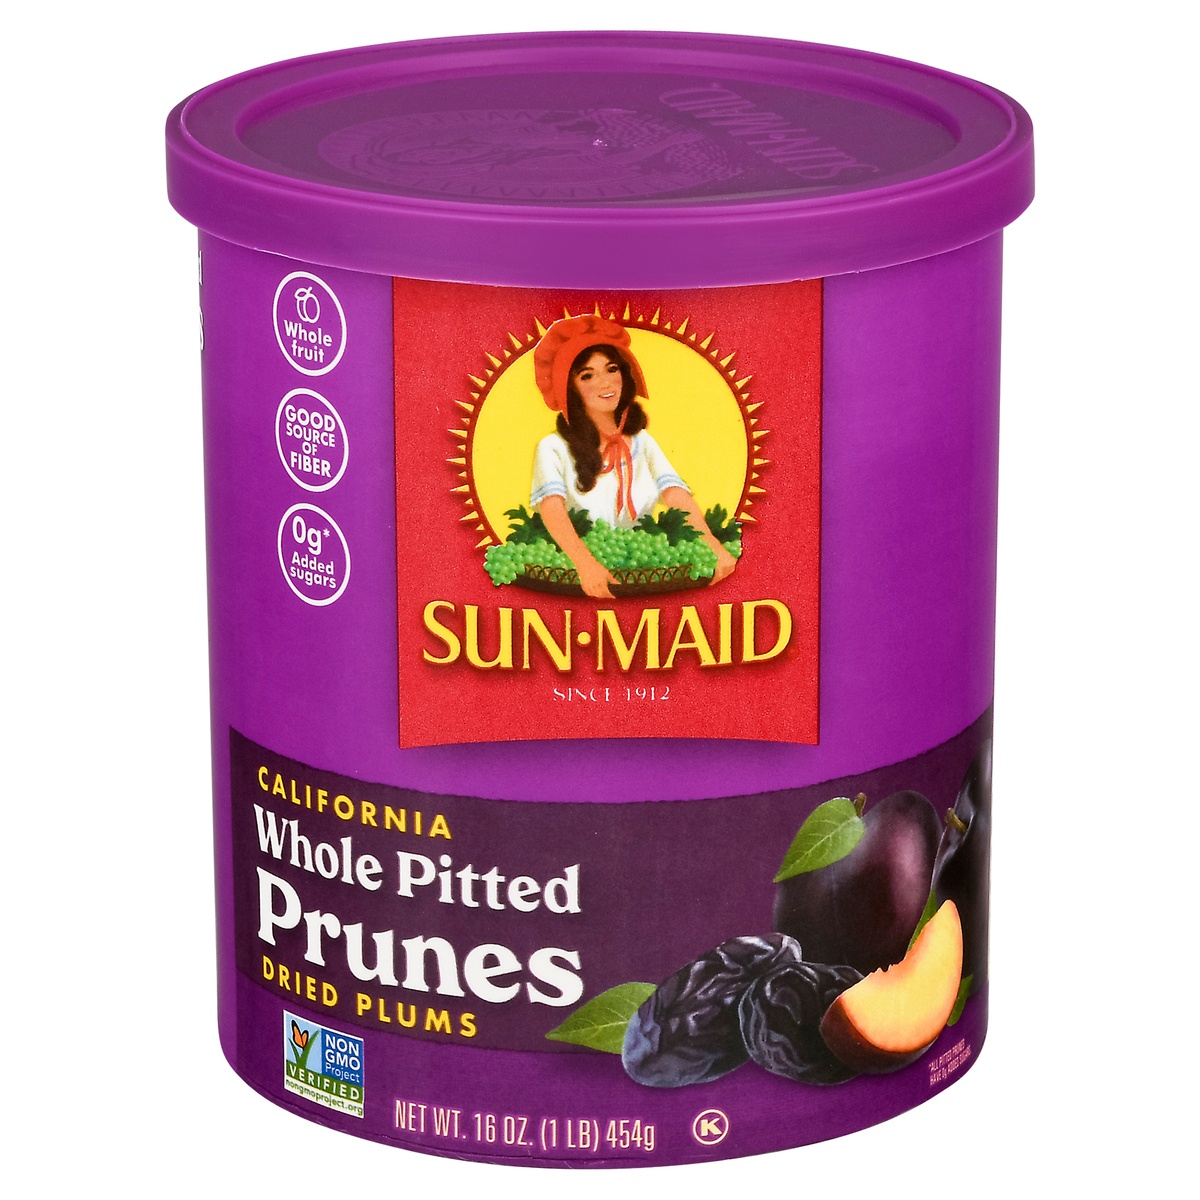 slide 1 of 6, Sun-Maid Whole Pitted Prunes Dried Plums 16 oz, 16 oz